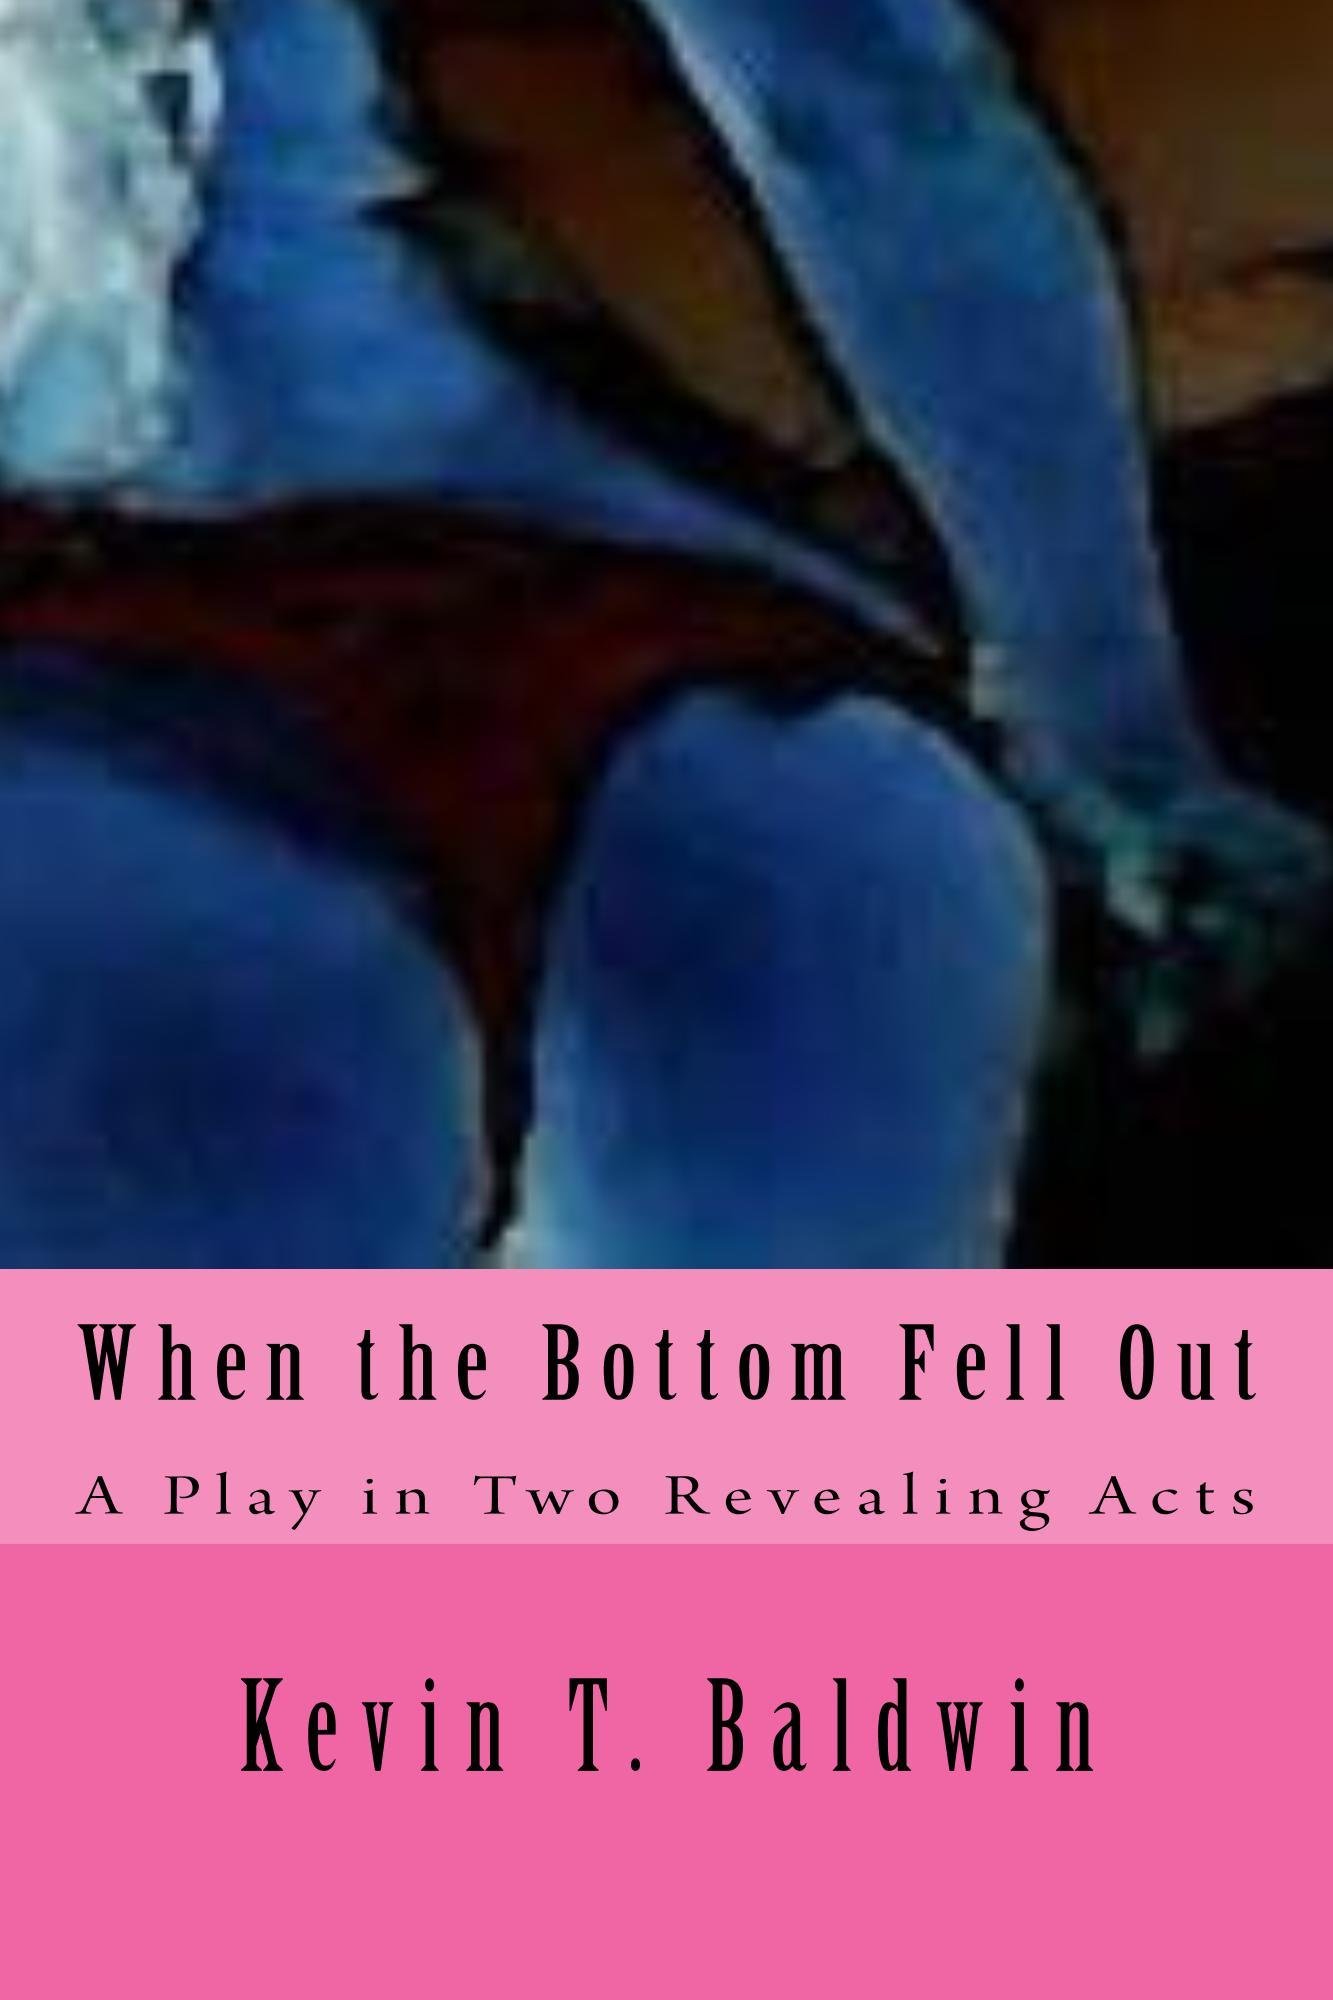 "When the Bottom Fell Out - A Play in Two Revealing Acts"